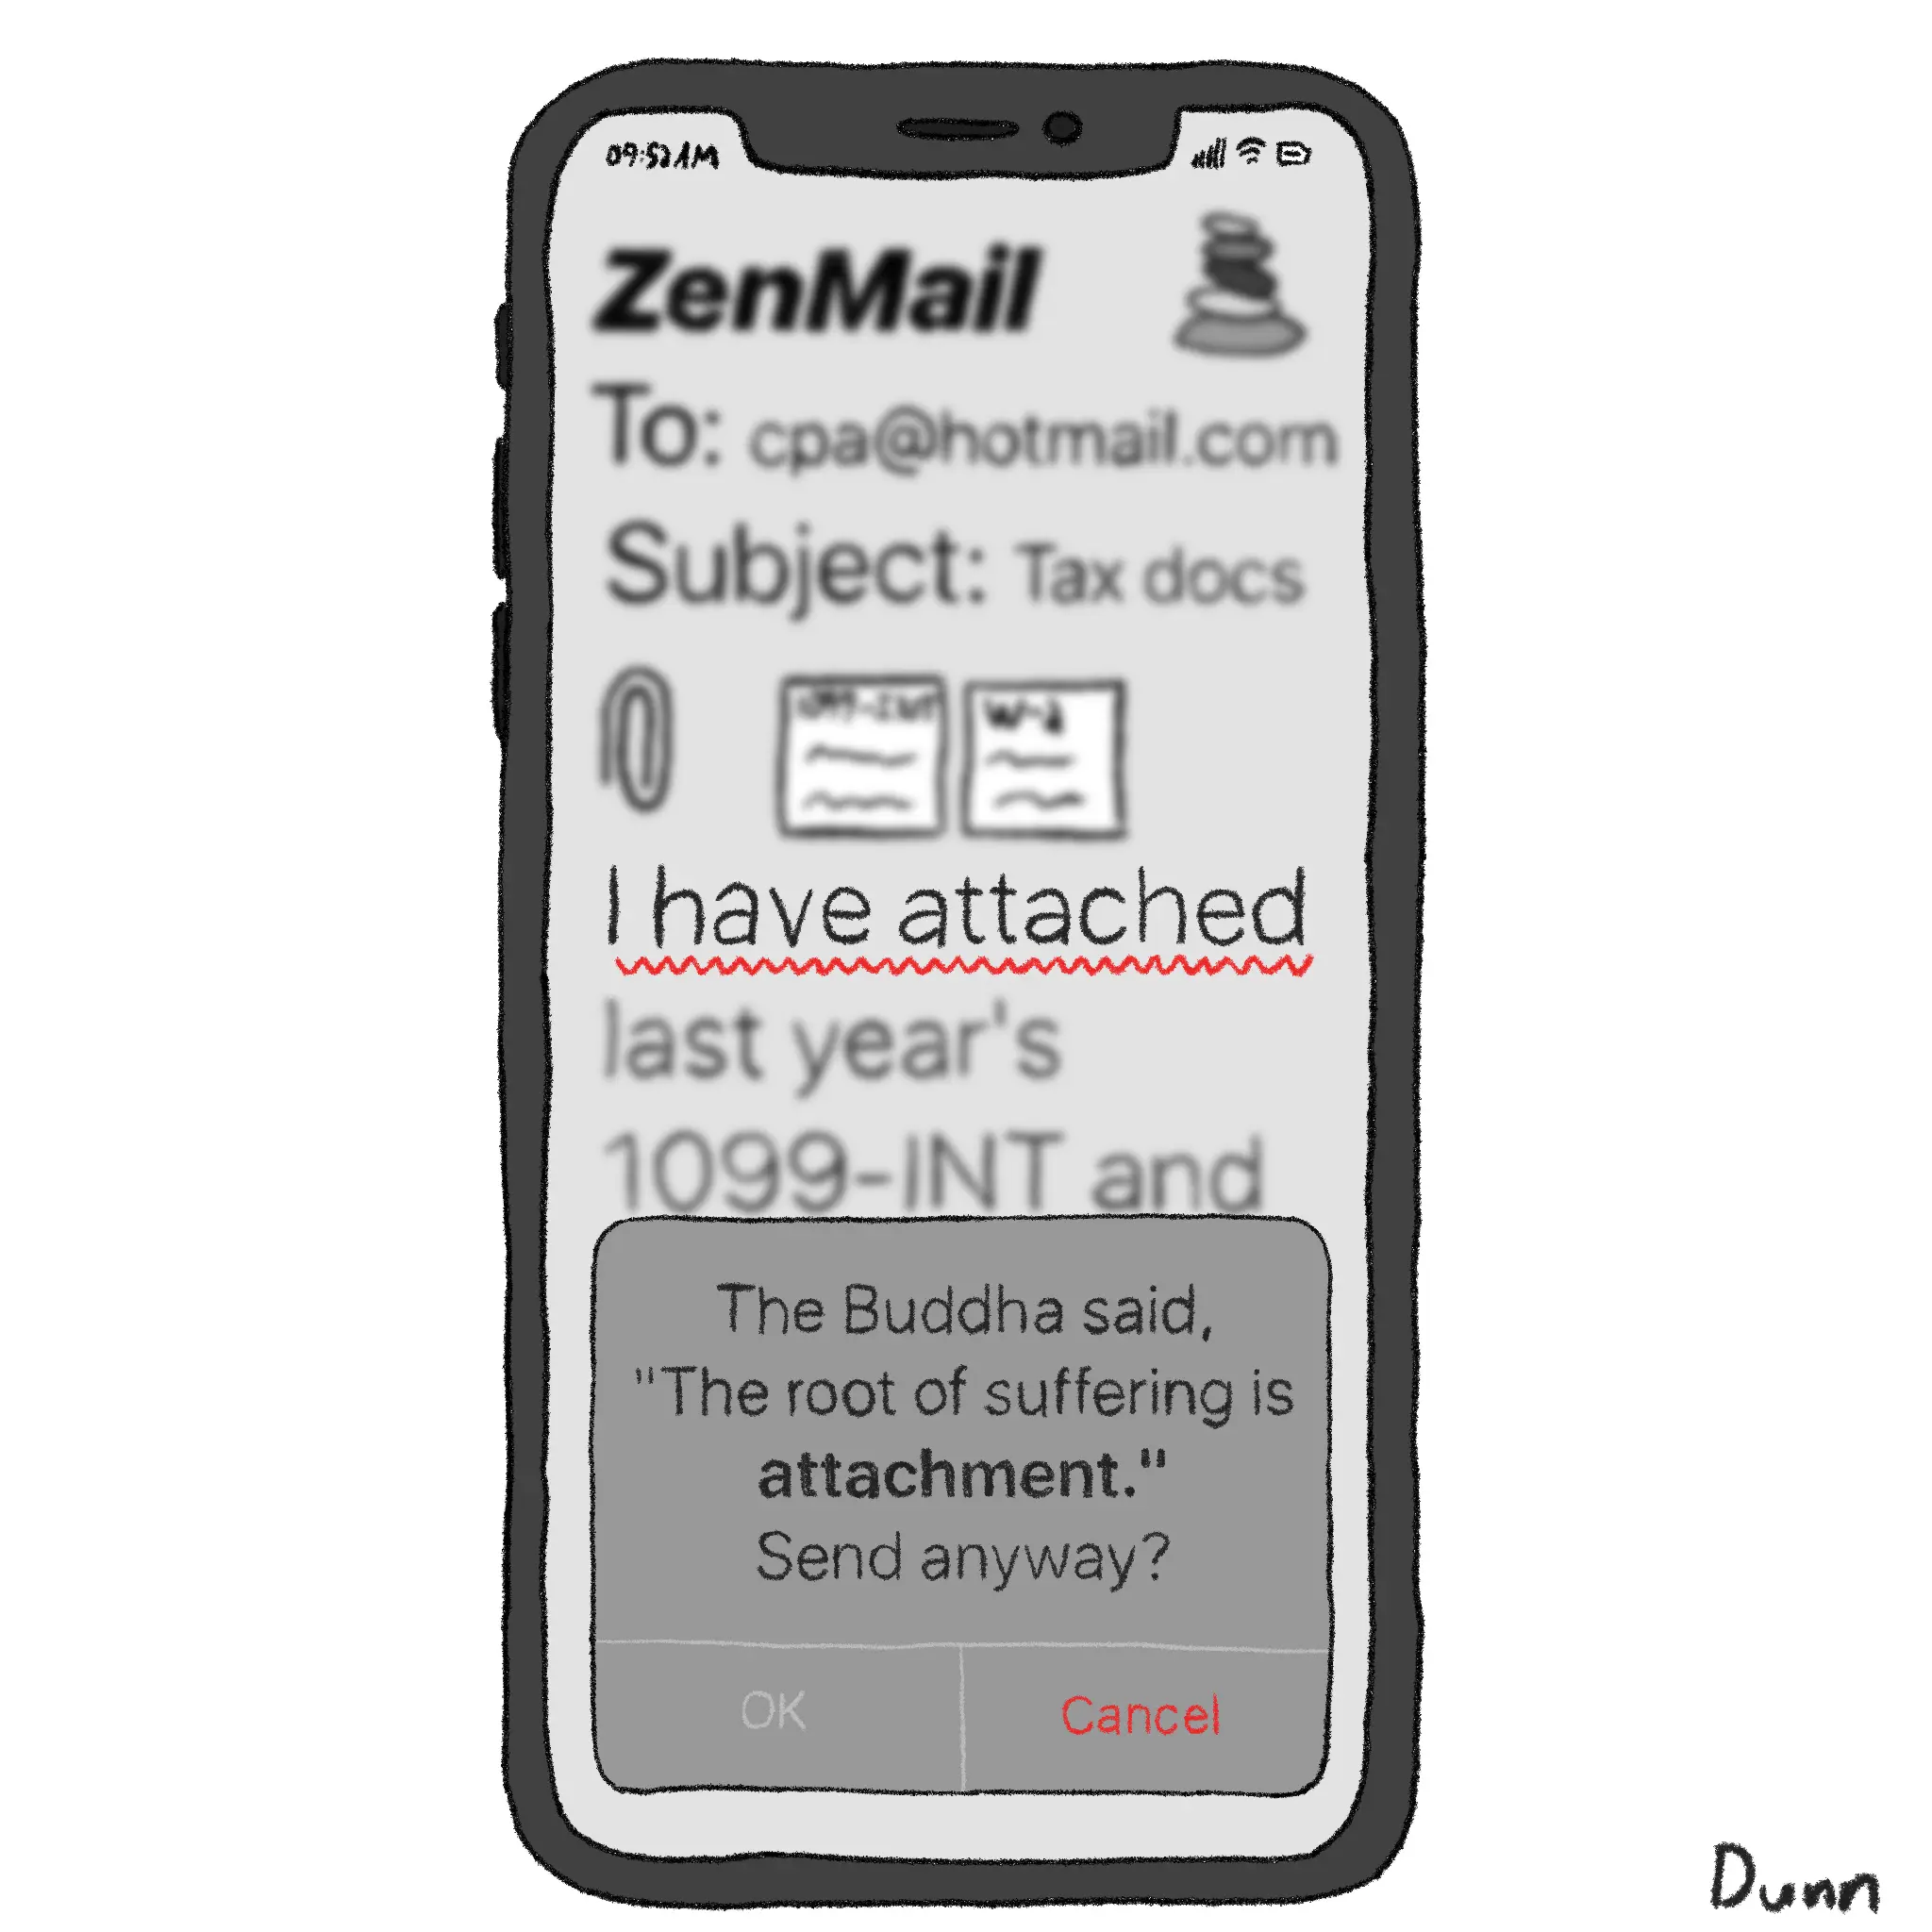 iPhone outline shown with an app open called ZenMail. To: cpa@hotmail.com. Subject: Tax docs. Body: “I have attached last year’s 1099-INT and…”, with a red underline under the words “I have attached”. A popup dialog is shown on the bottom of the screen, saying, “The Buddha said, ‘The root of suffering is attachment.’ Send anyway?